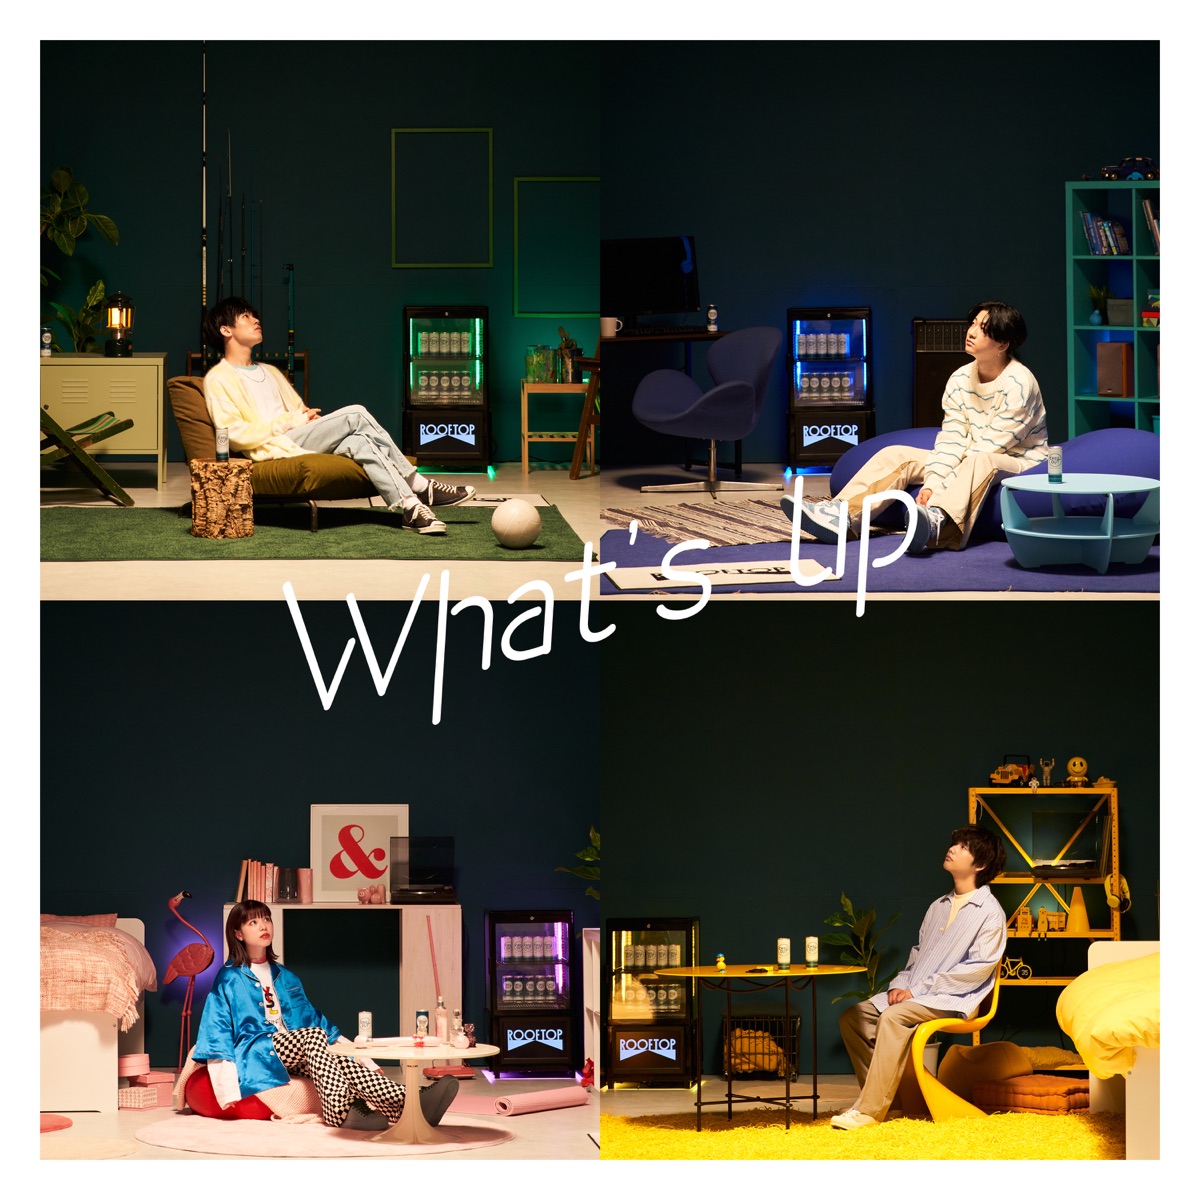 Cover art for『Rinne, Kubotakai, asmi, ANATSUME - What's up』from the release『What's up